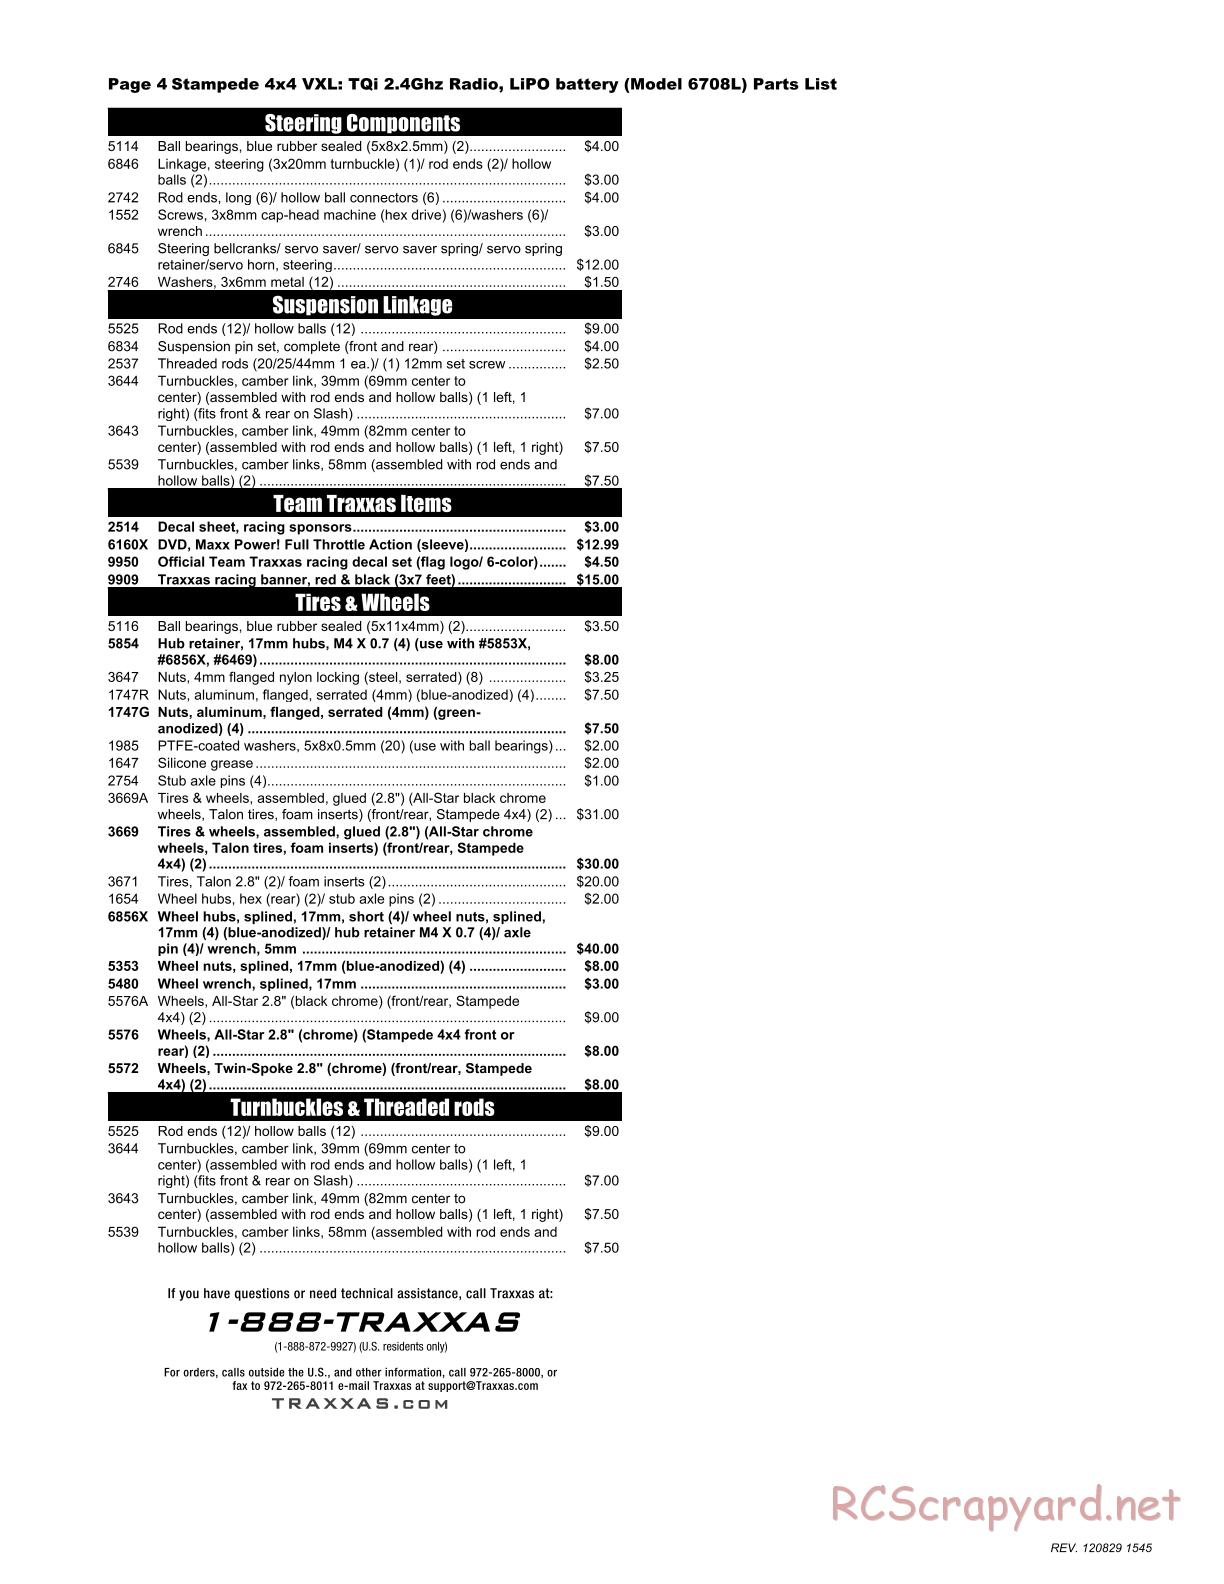 Traxxas - Stampede 4x4 VXL (2012) - Parts List - Page 4